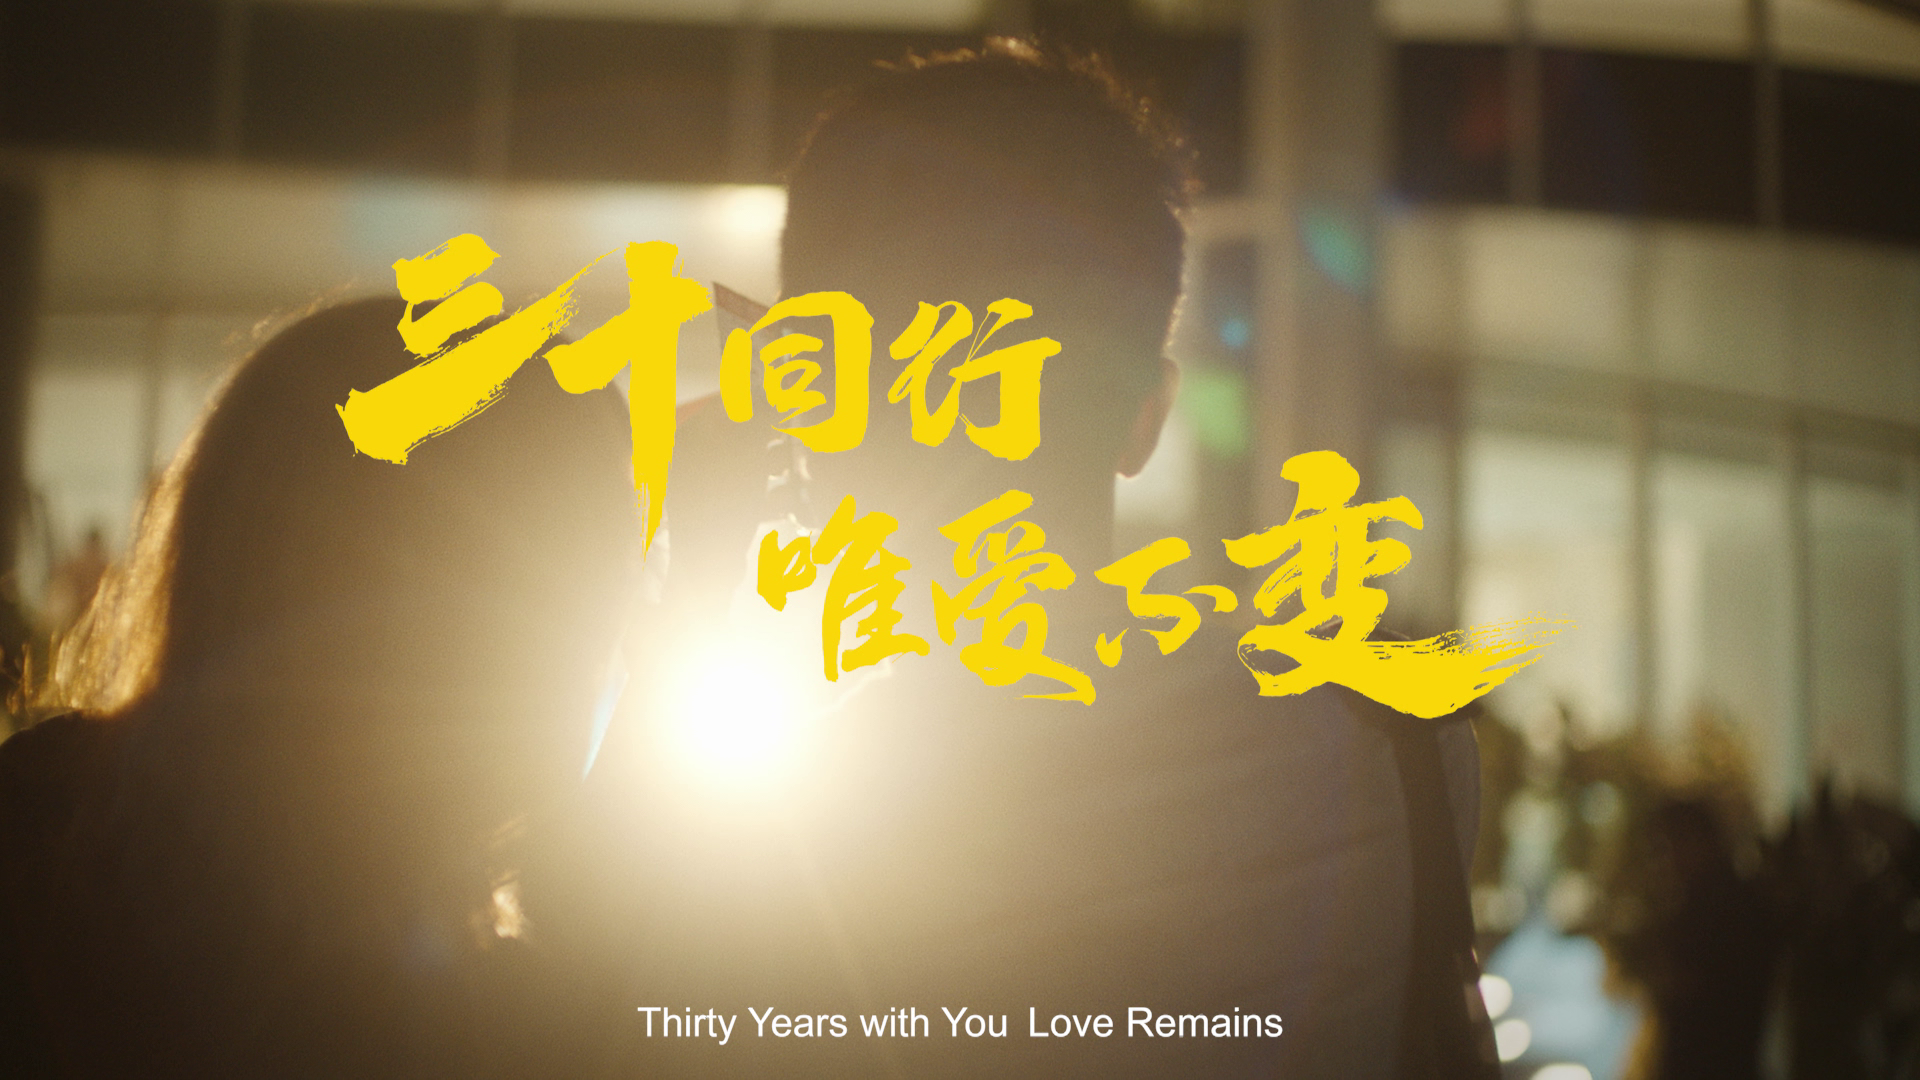 Thirty Years with You Love Remains